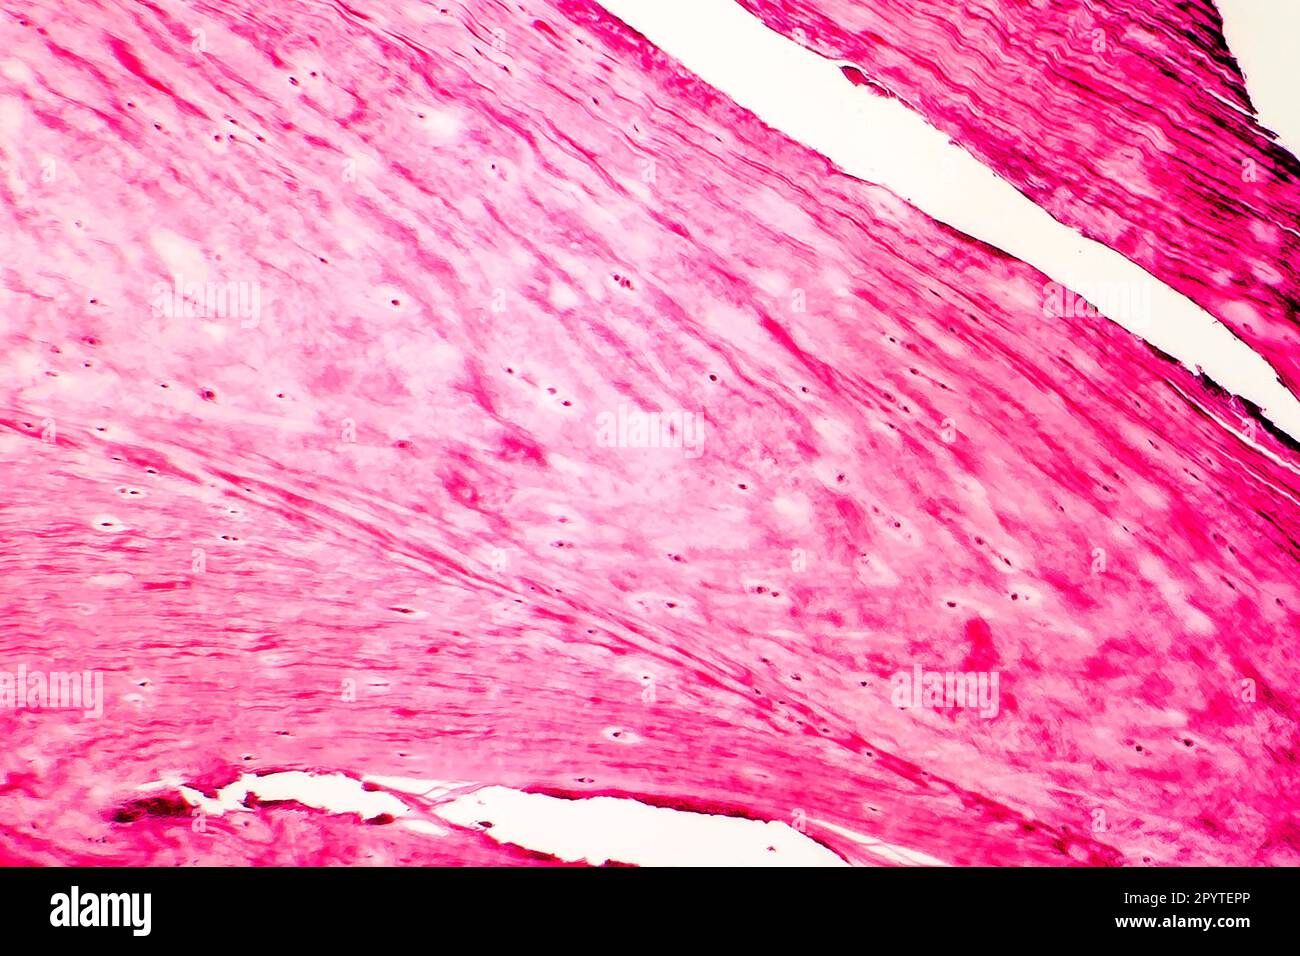 Fibrous cartilage, light micrograph. High magnification. Hematoxylin and eosin staining Stock Photo